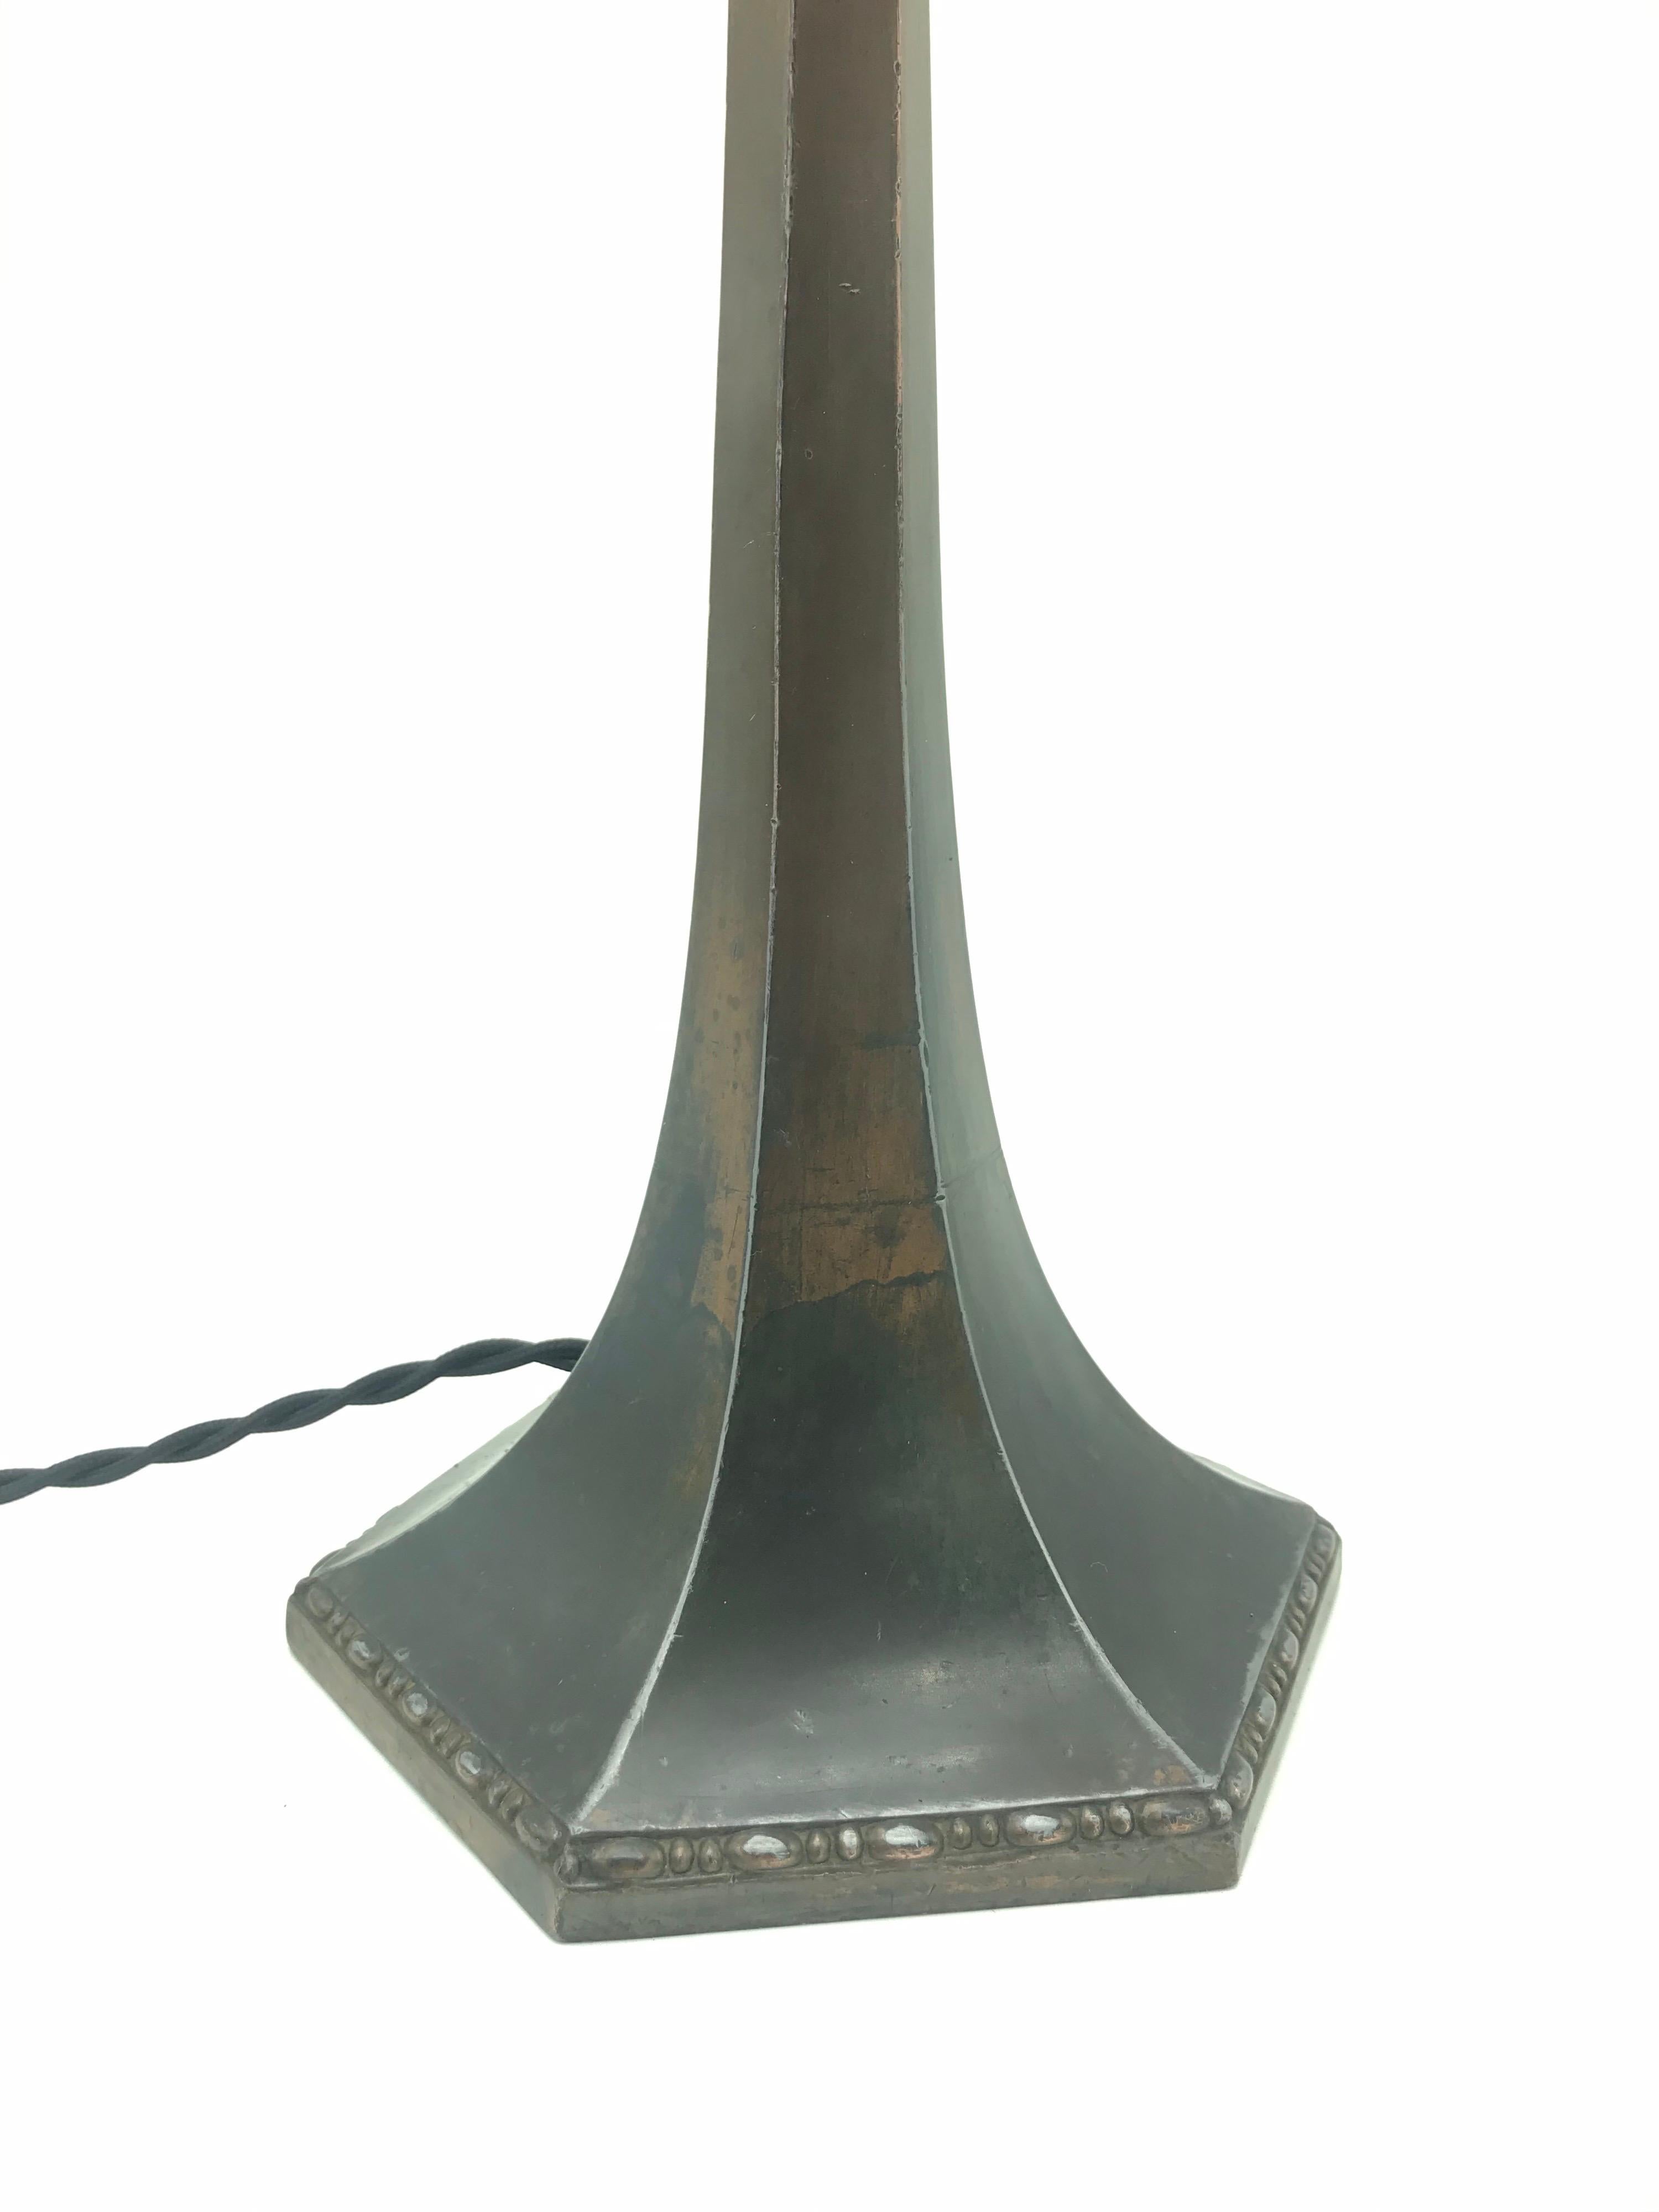 A very elegant antique Art Deco table lamp in cast alloy
From the 1920s in a Classic Art Deco design
Rewired and with a new shade
A possibility of choosing from a variety of shades
A great English country house feel.